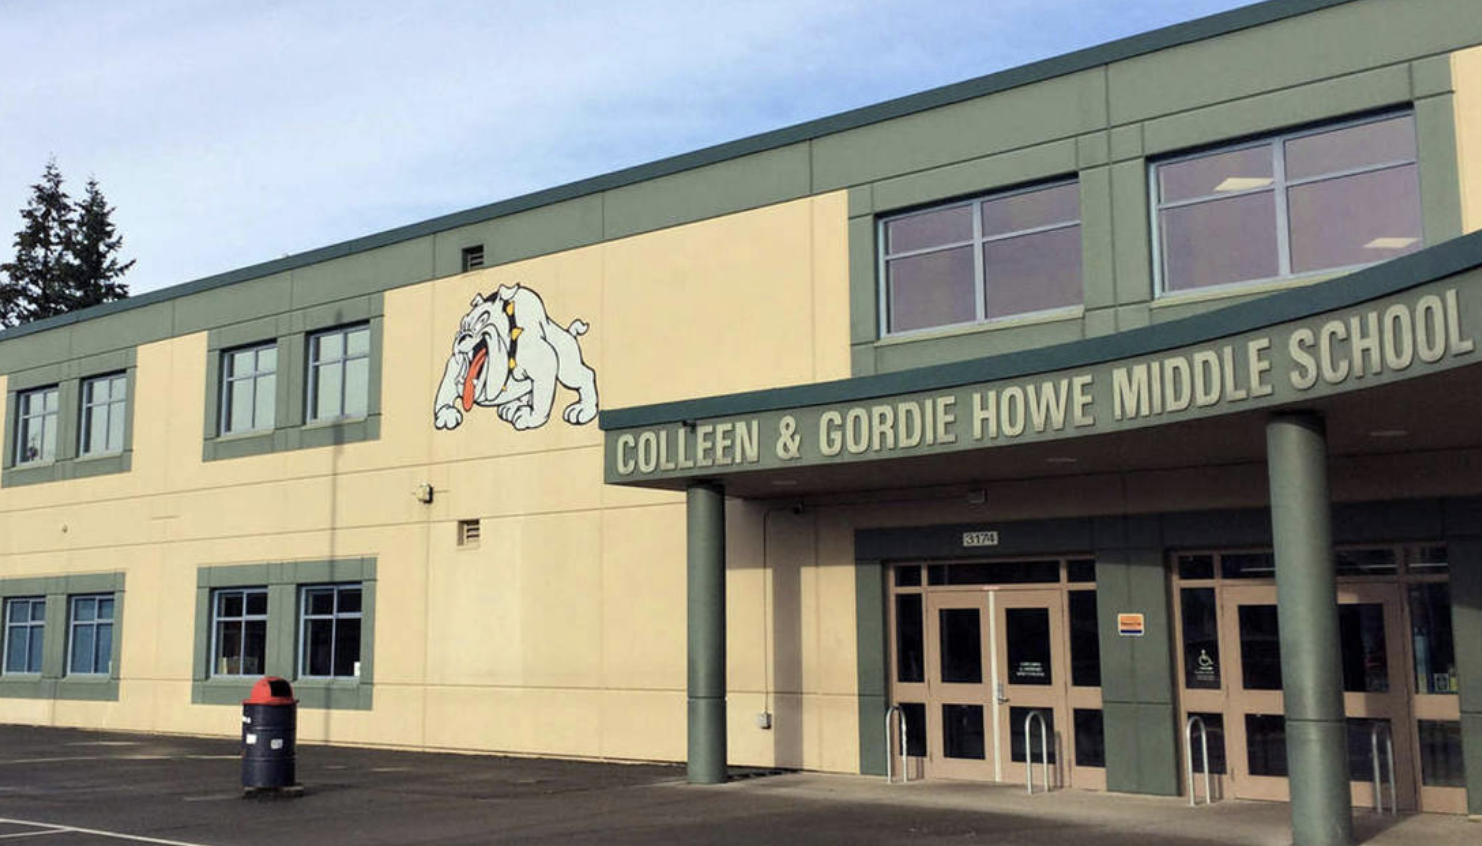 Bomb Threat at Colleen & Gordie Howe Middle School Abbotsford